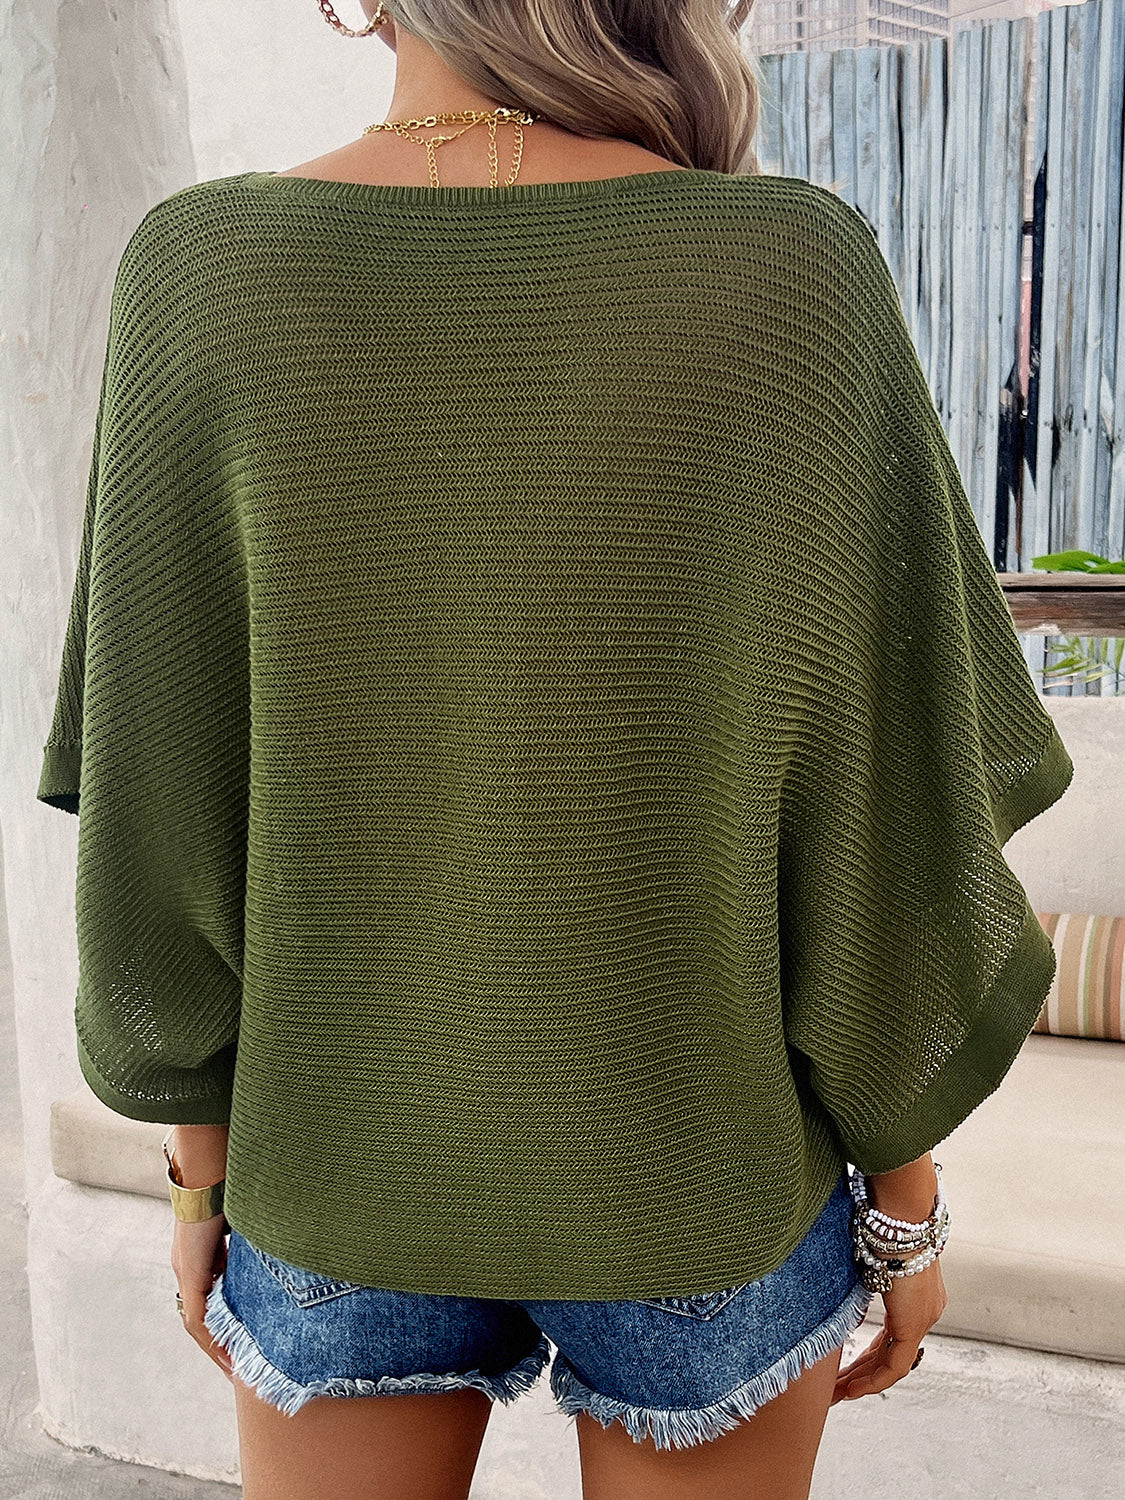 V-Neck Batwing Sleeve Knit Top